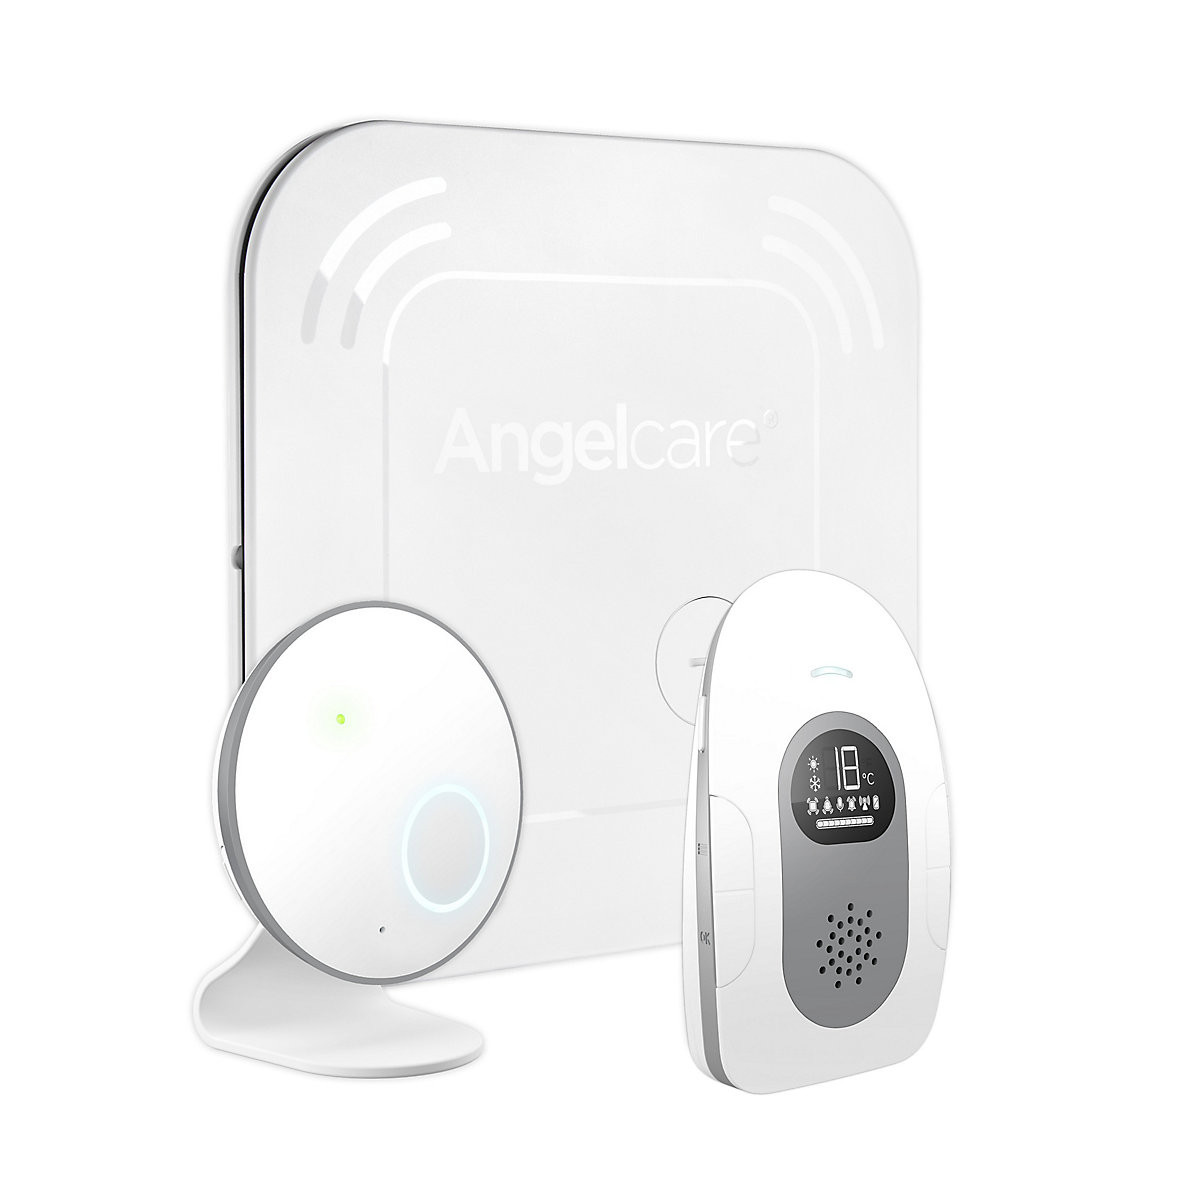 Baby sound monitor - AC601 - Angelcare - movement